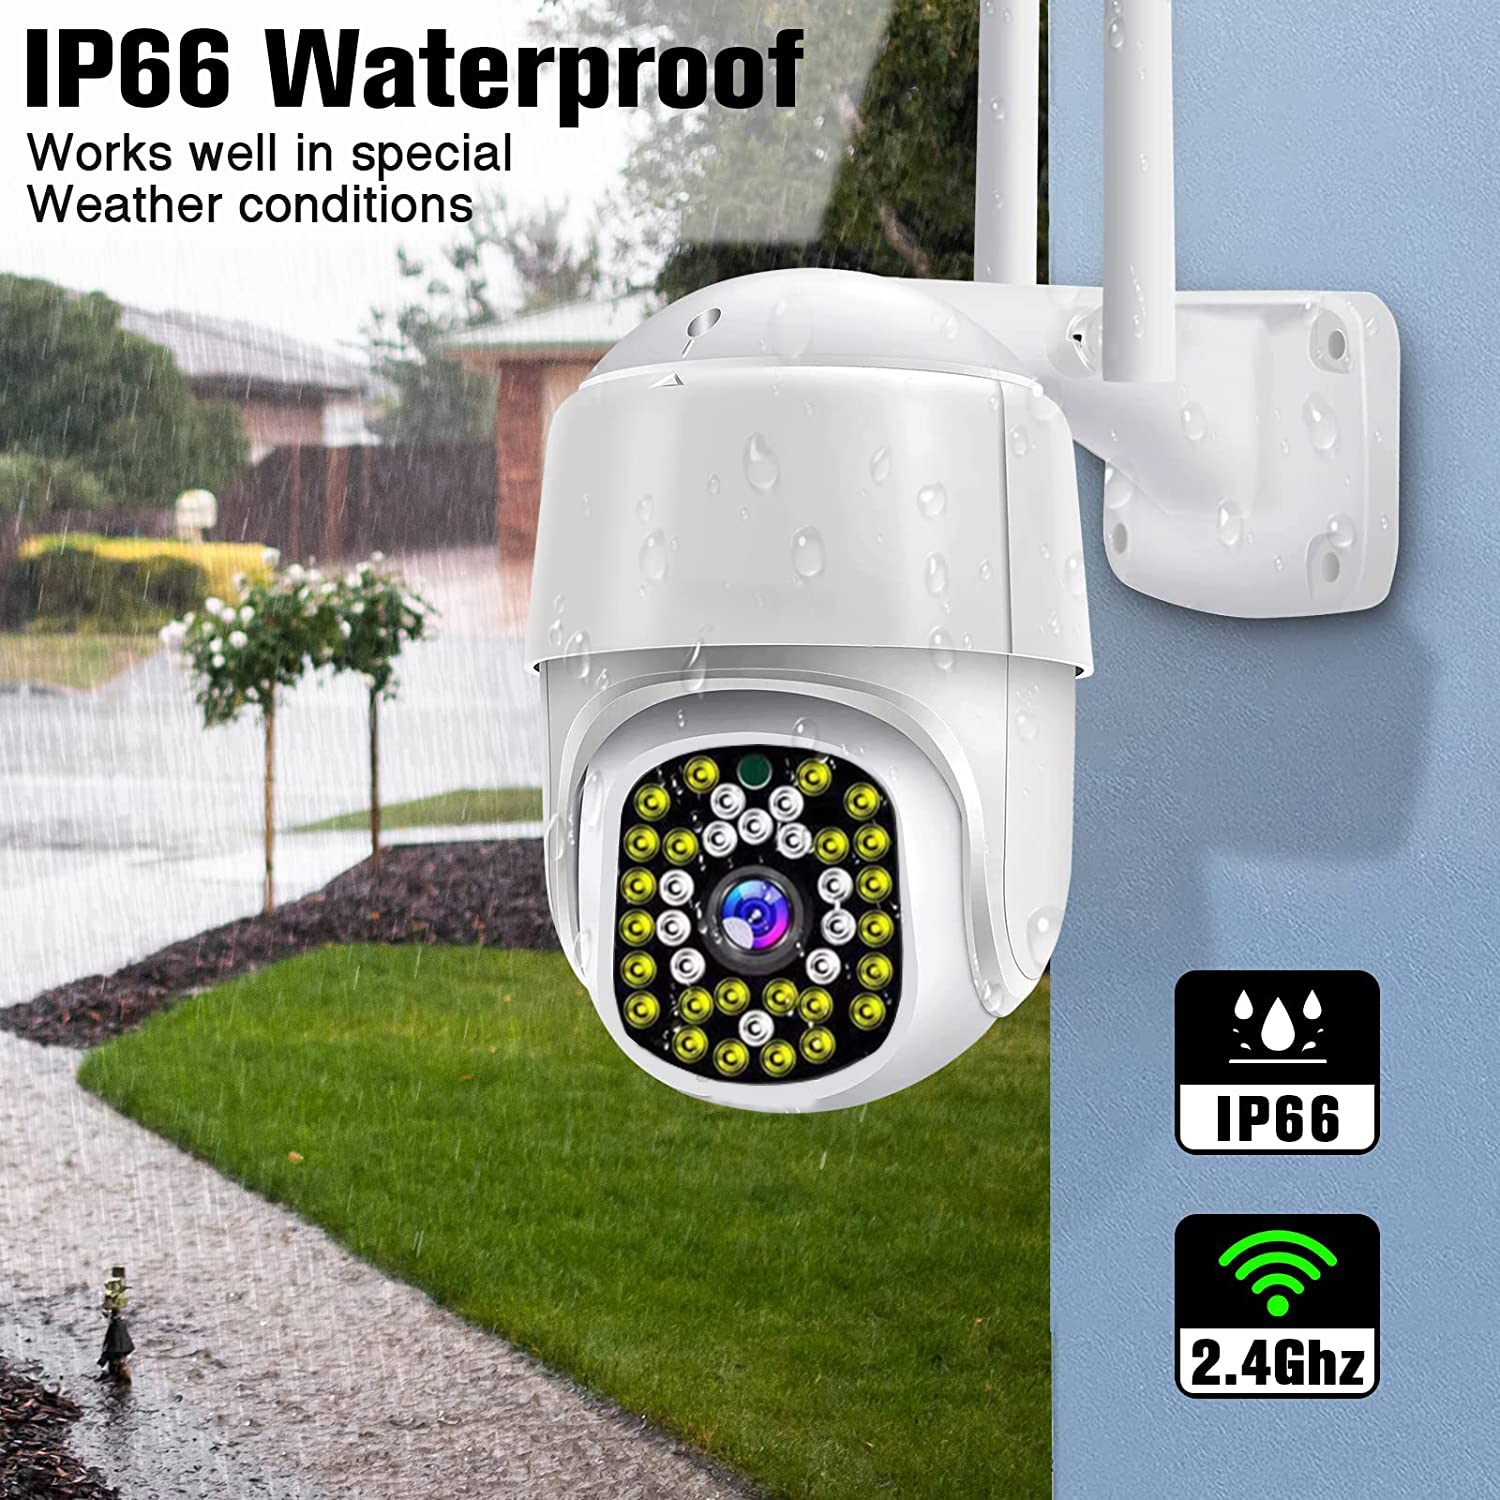 Security-Cameras-3MP-Security-Camera-WiFi-Camera-Outdoor-Home-Security-Camera-with-Spotlight-Night-Vision-Alarm-Remote-Access-Motion-Detection-Waterproof-2-Way-Audio-13